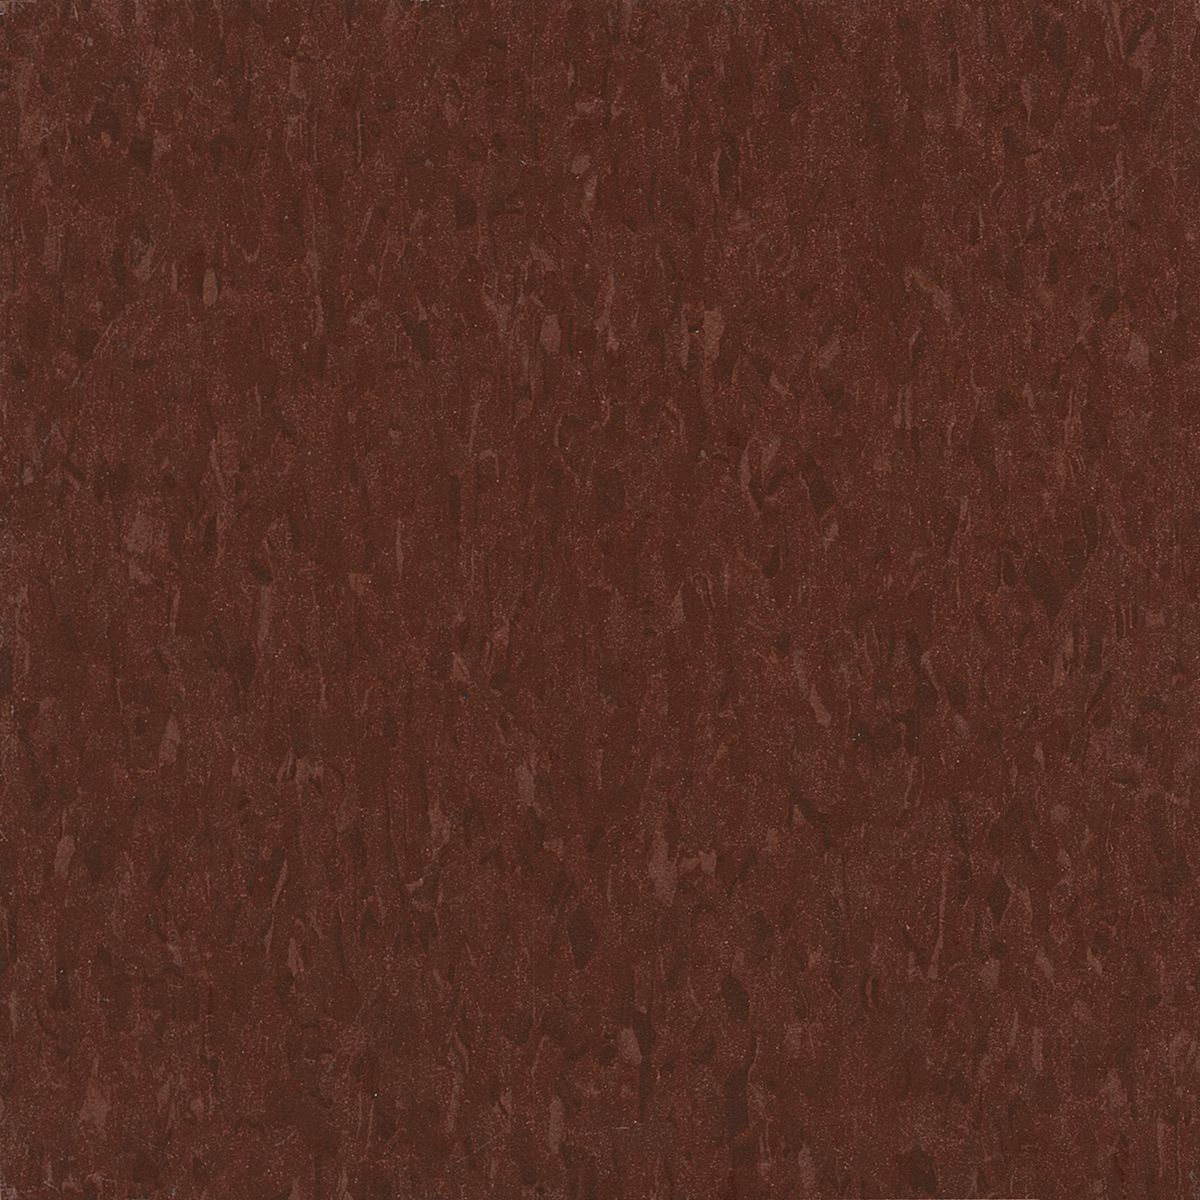 Standard Excelon Imperial Texture Adobe